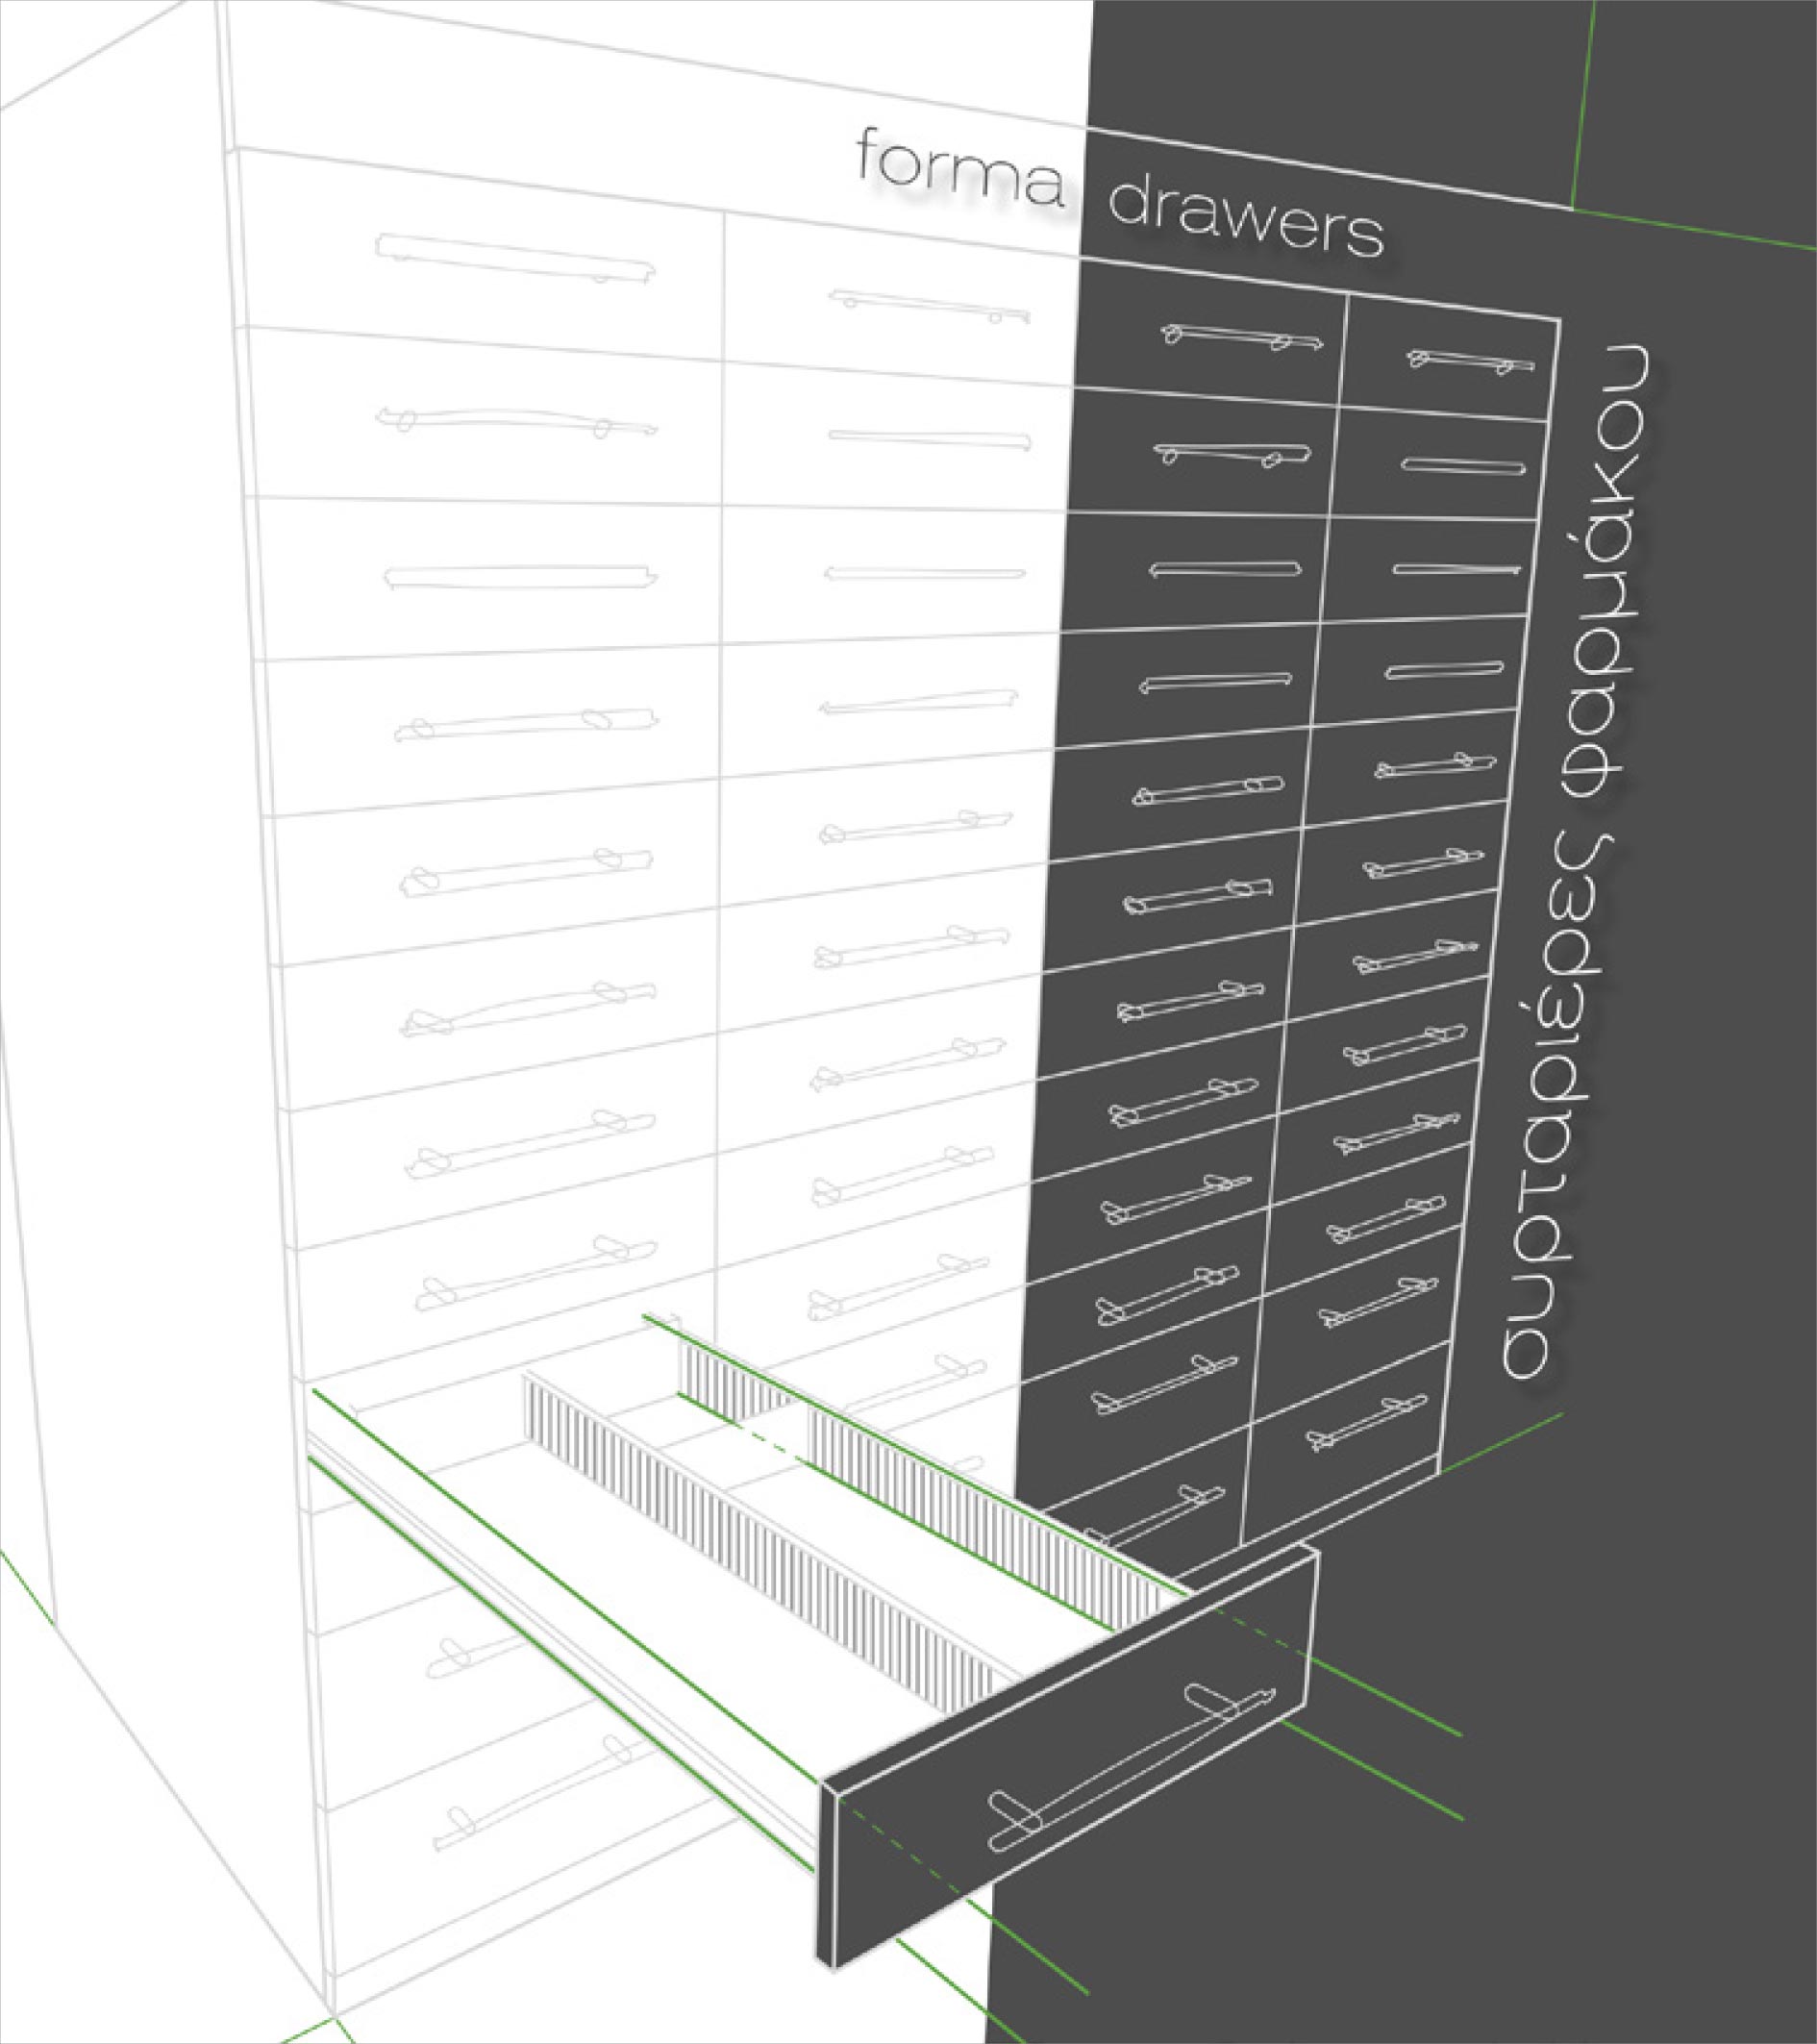 forma-drawers